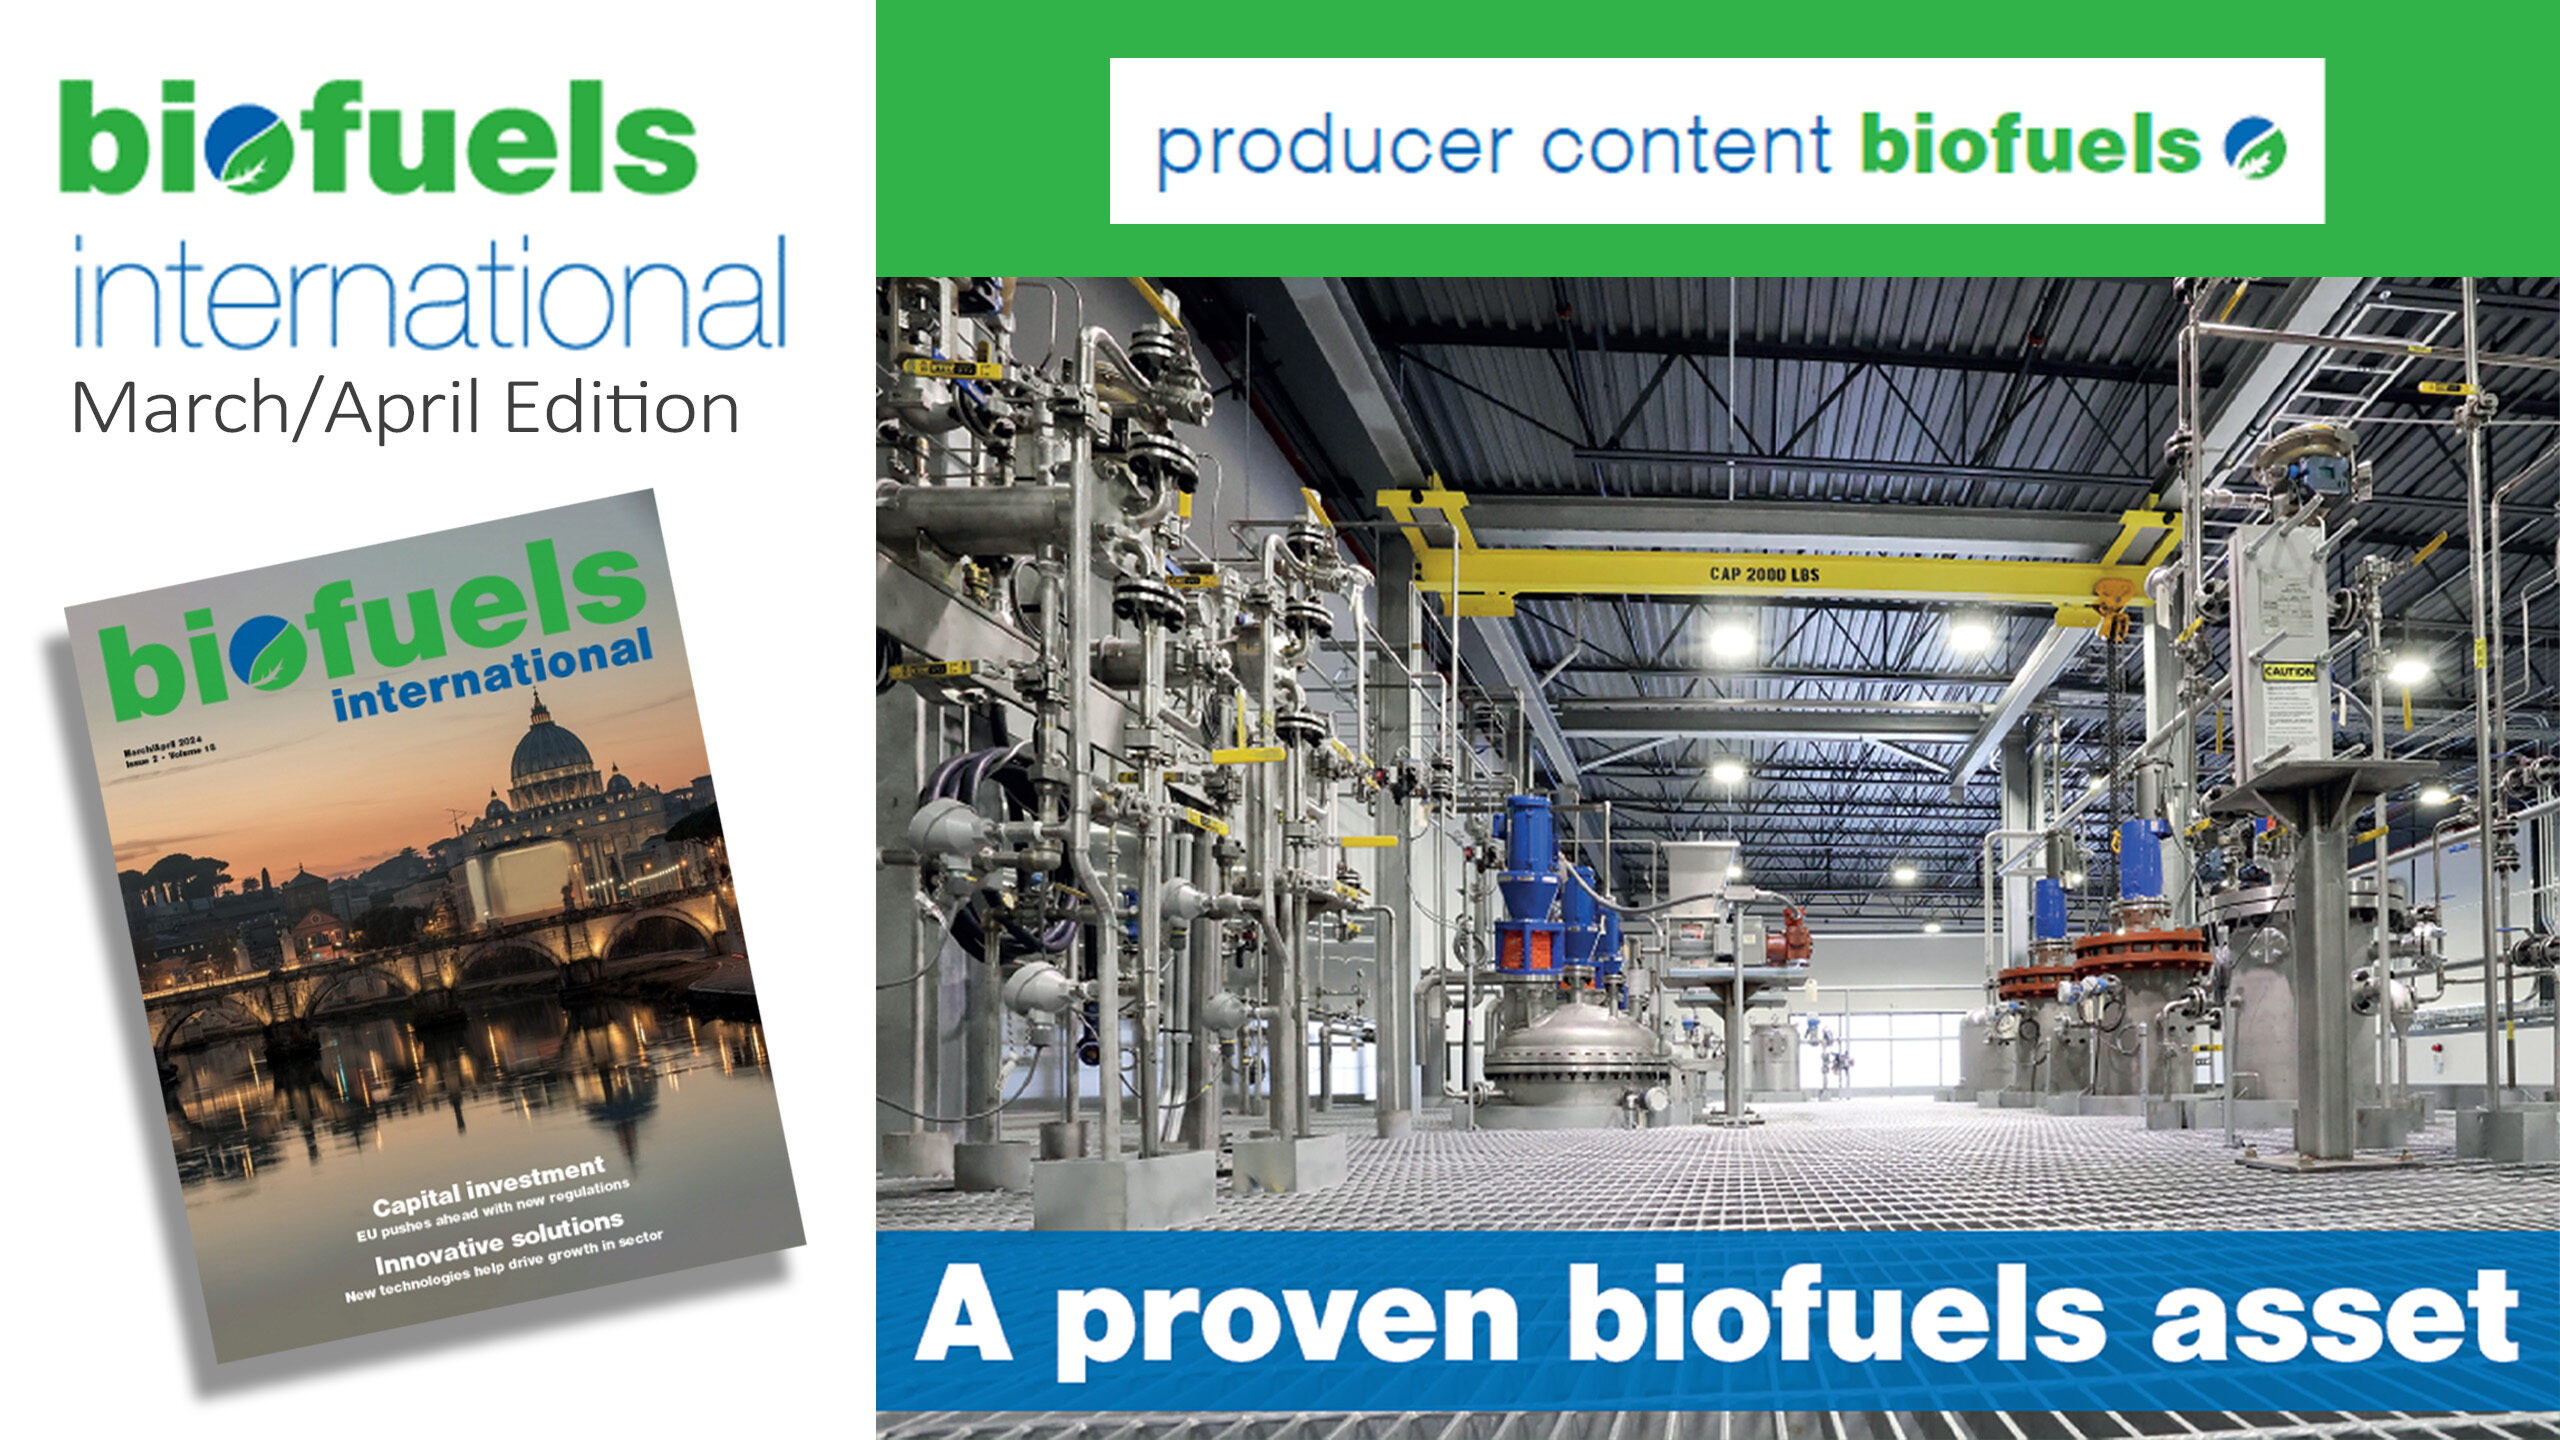 Biofuels International - Creative Applications for Co-Products